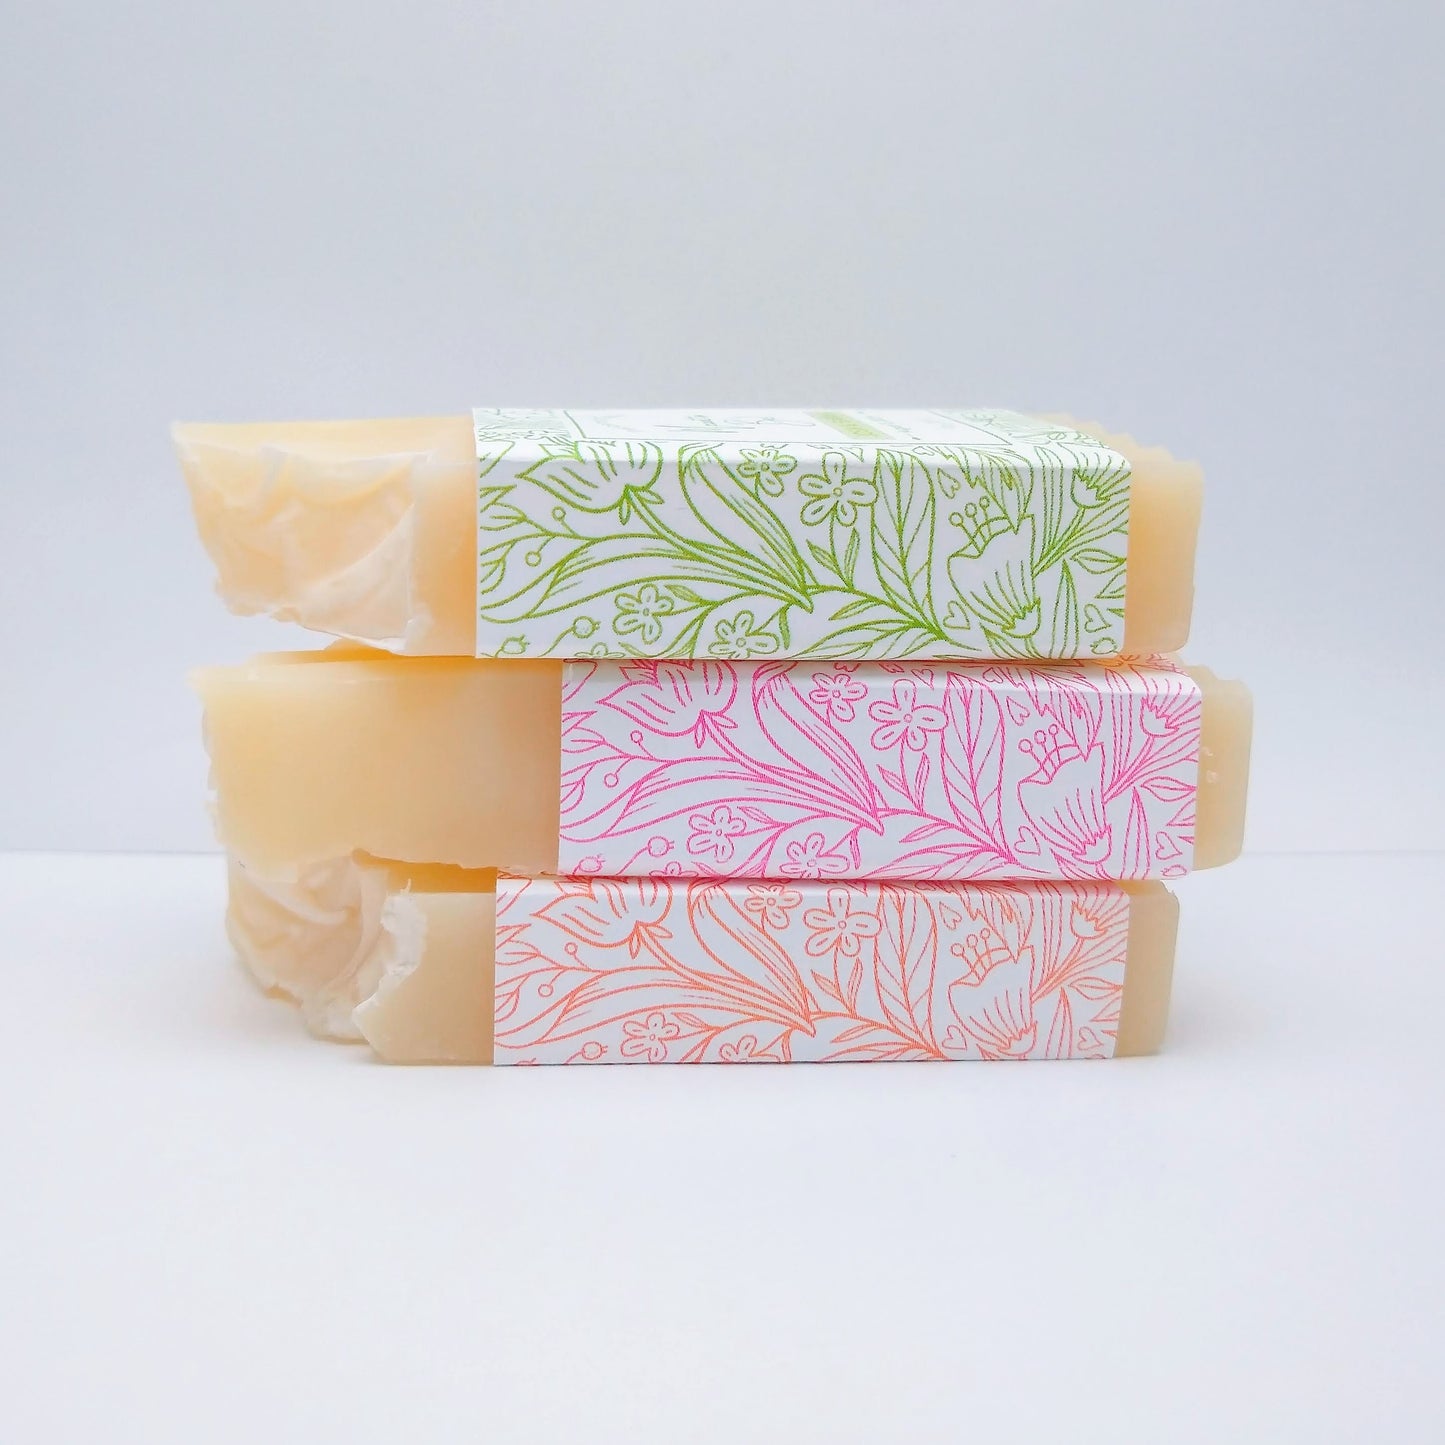 3 mini cream-colored stacked on top of each other long ways with green, pink, and orange labels on a white background.